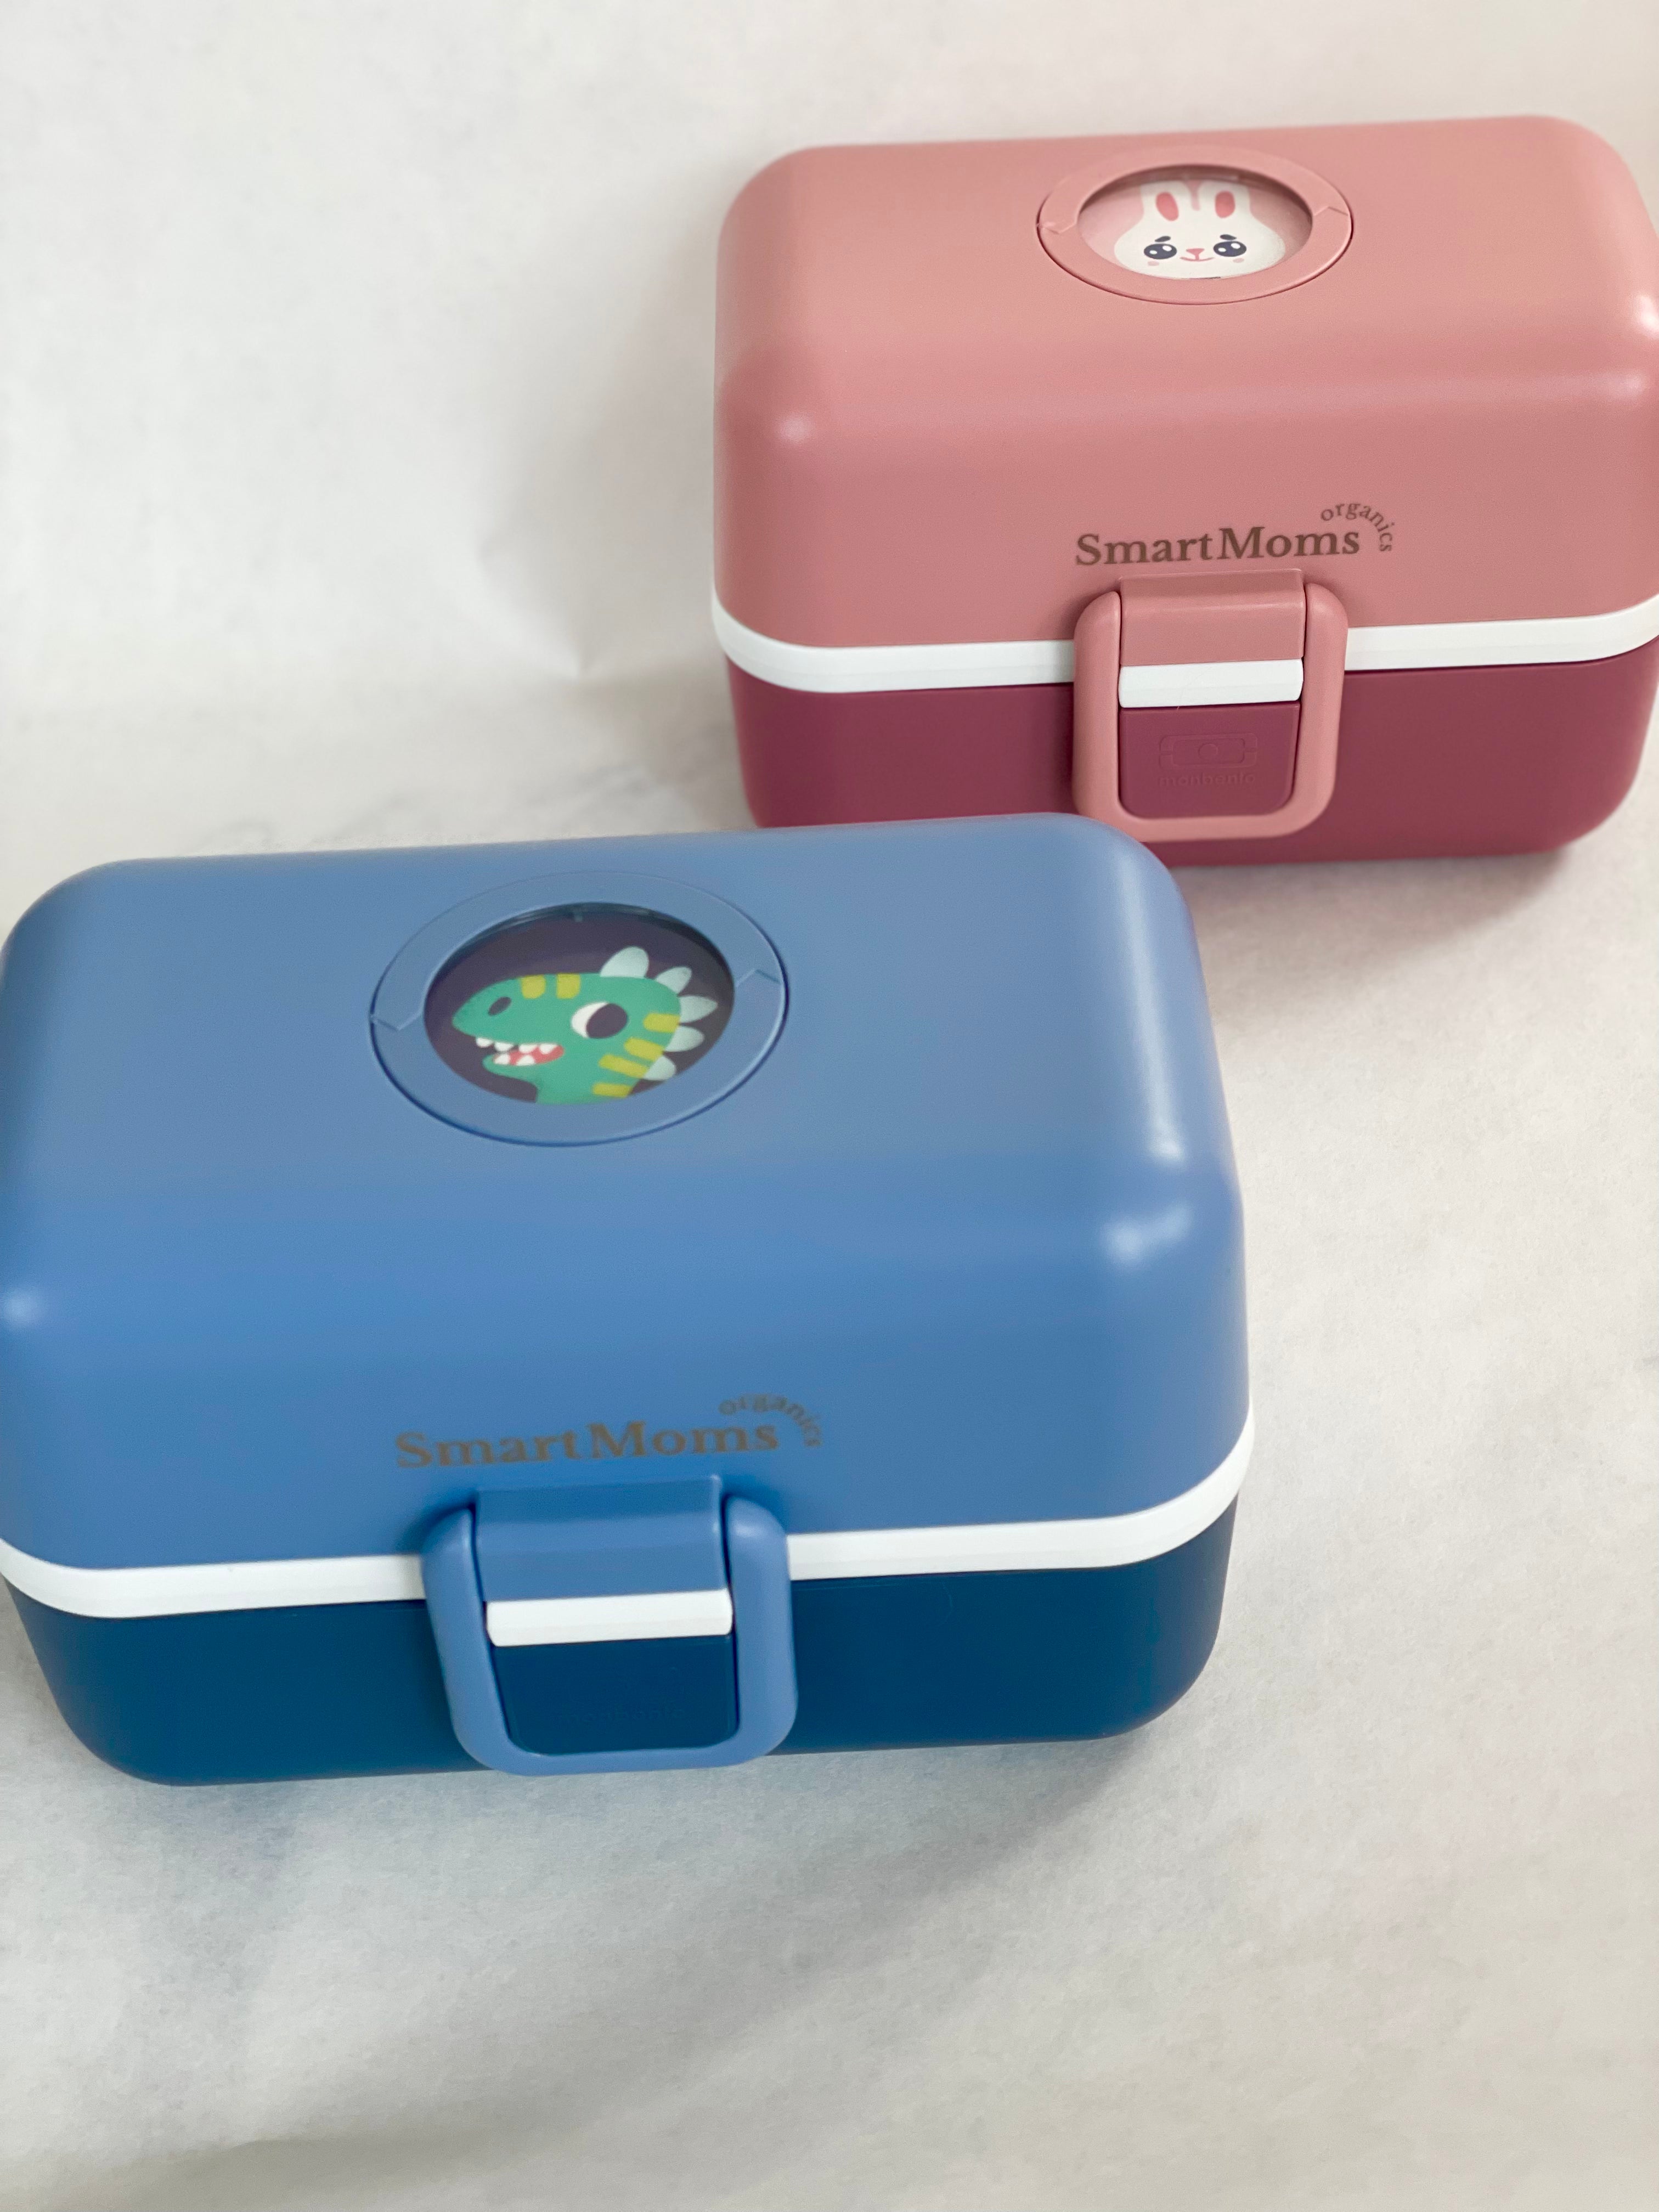 Sale: lunch boxes and accessories - monbento